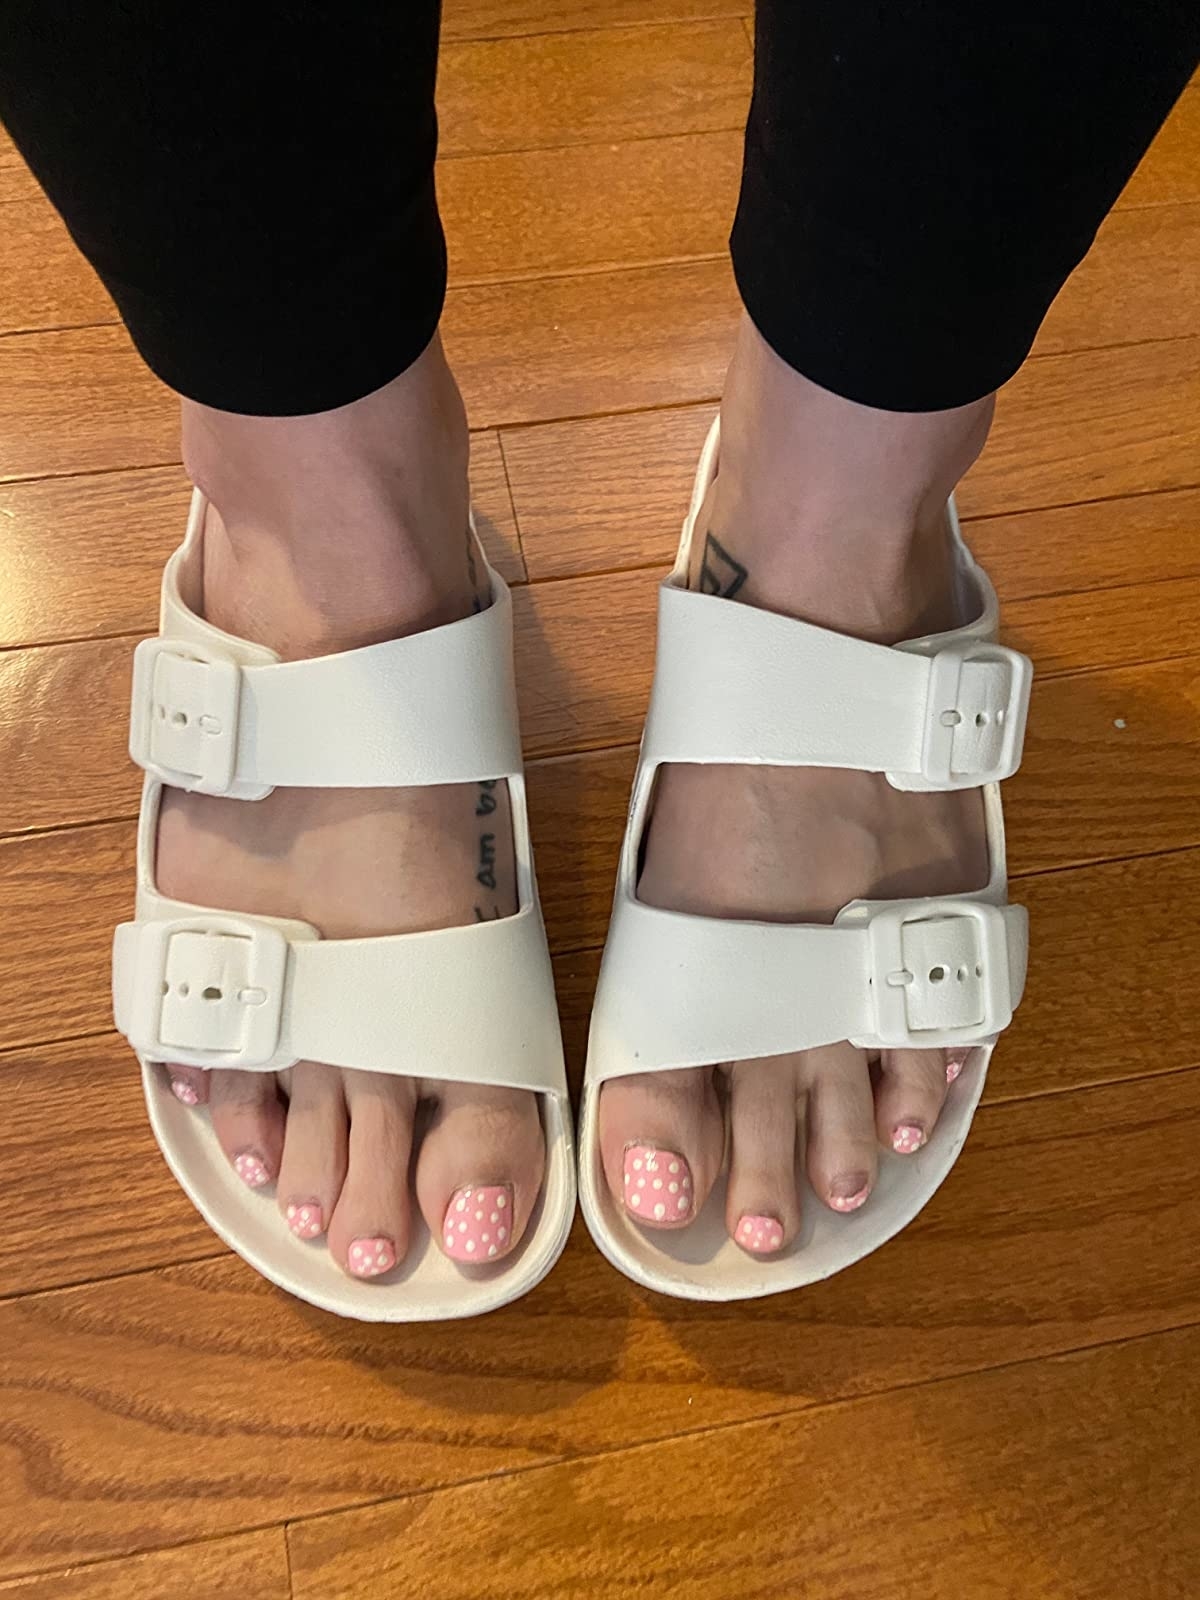 Reviewer wearing the cream slides